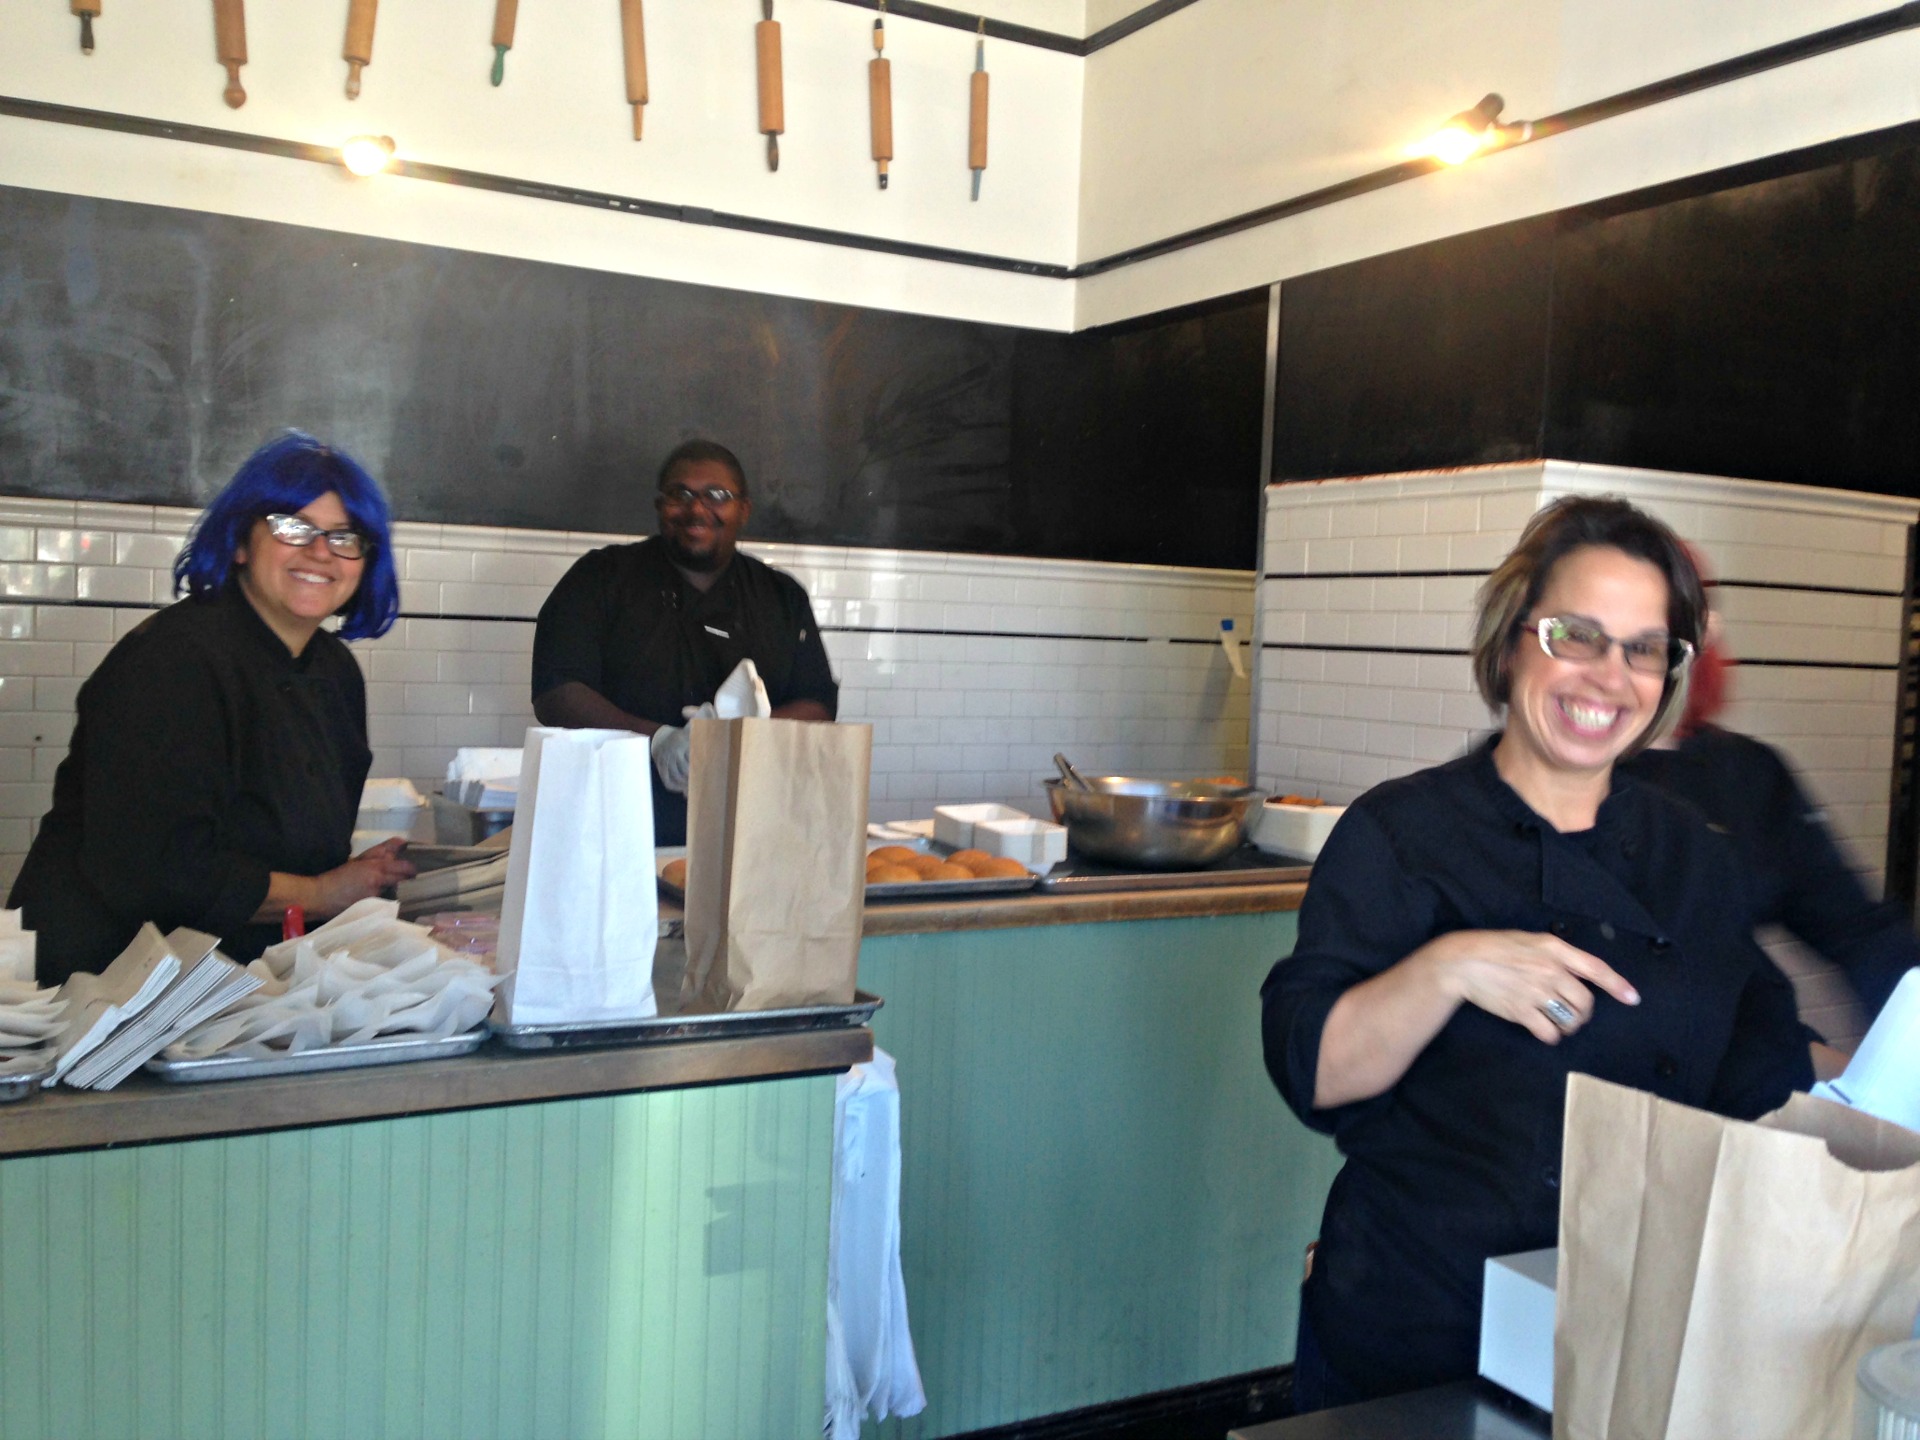 Bakesale Betty's owner blue-wigged Alison Barakat and cheerful workers.